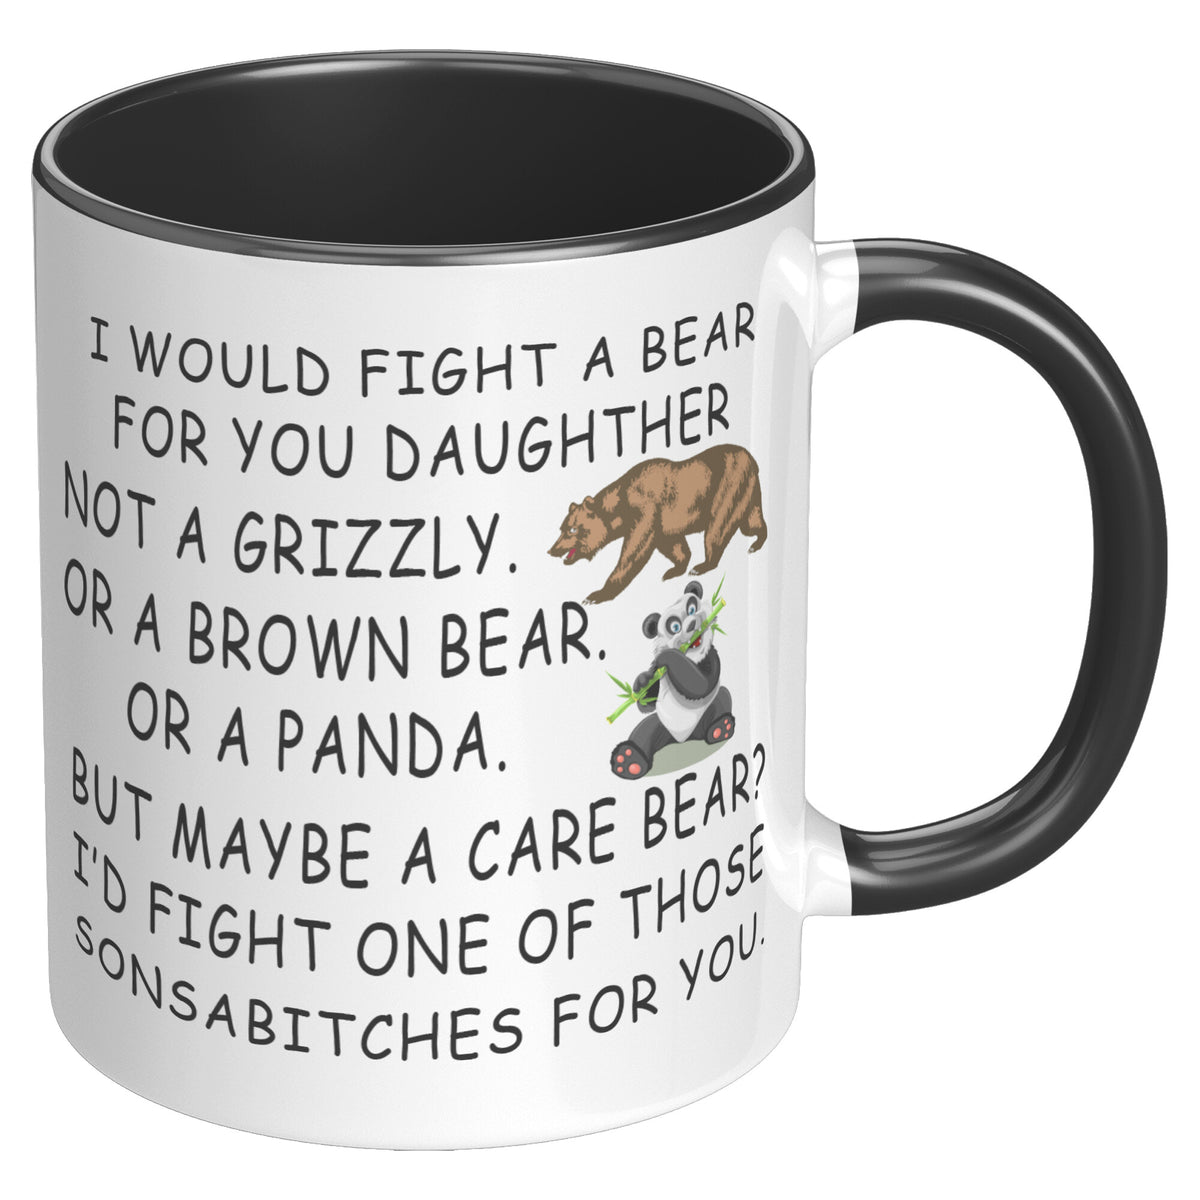 Funny Gift For Daughter - Fight Care Bear For You Accent Coffee Mug 11oz